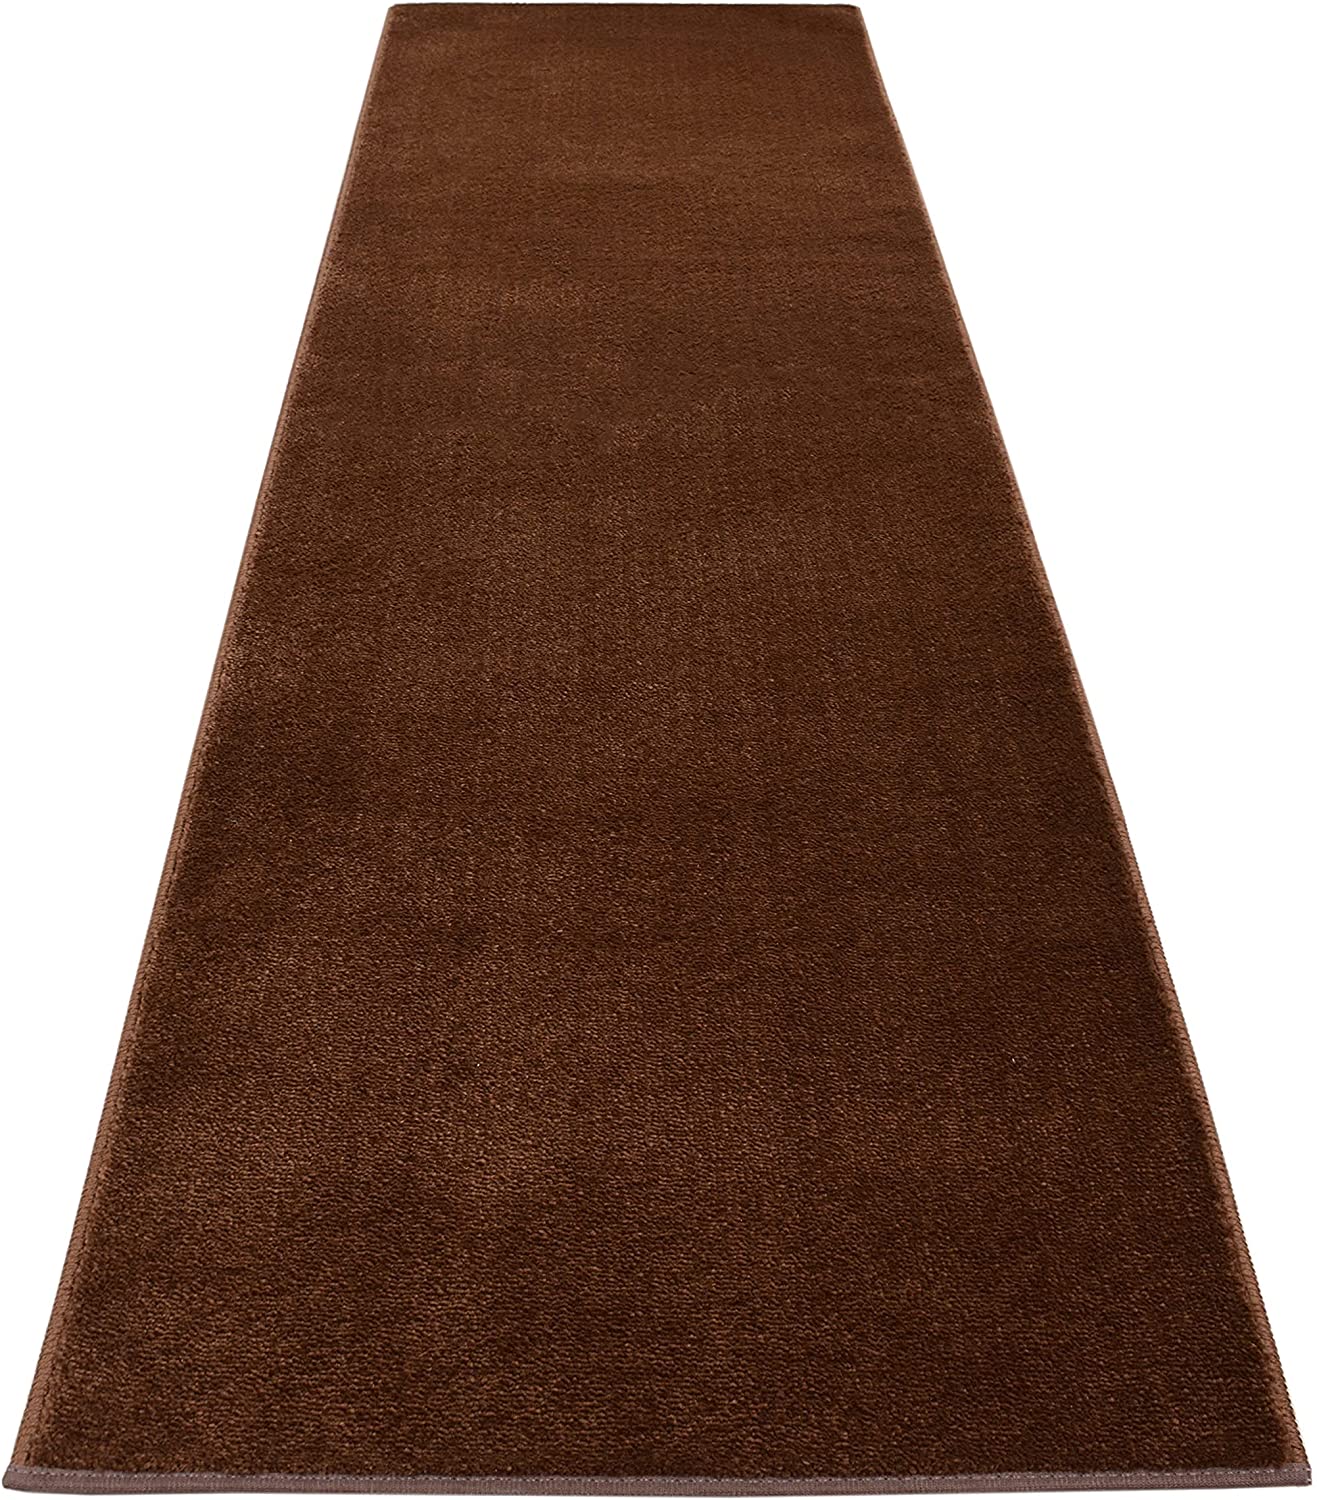 Machine Washable Custom Size Runner Rug Copper Brown Color Skid Resistant Rug Runner Customize Up to 50 Feet and 26 Inch Width Runner Rug-5